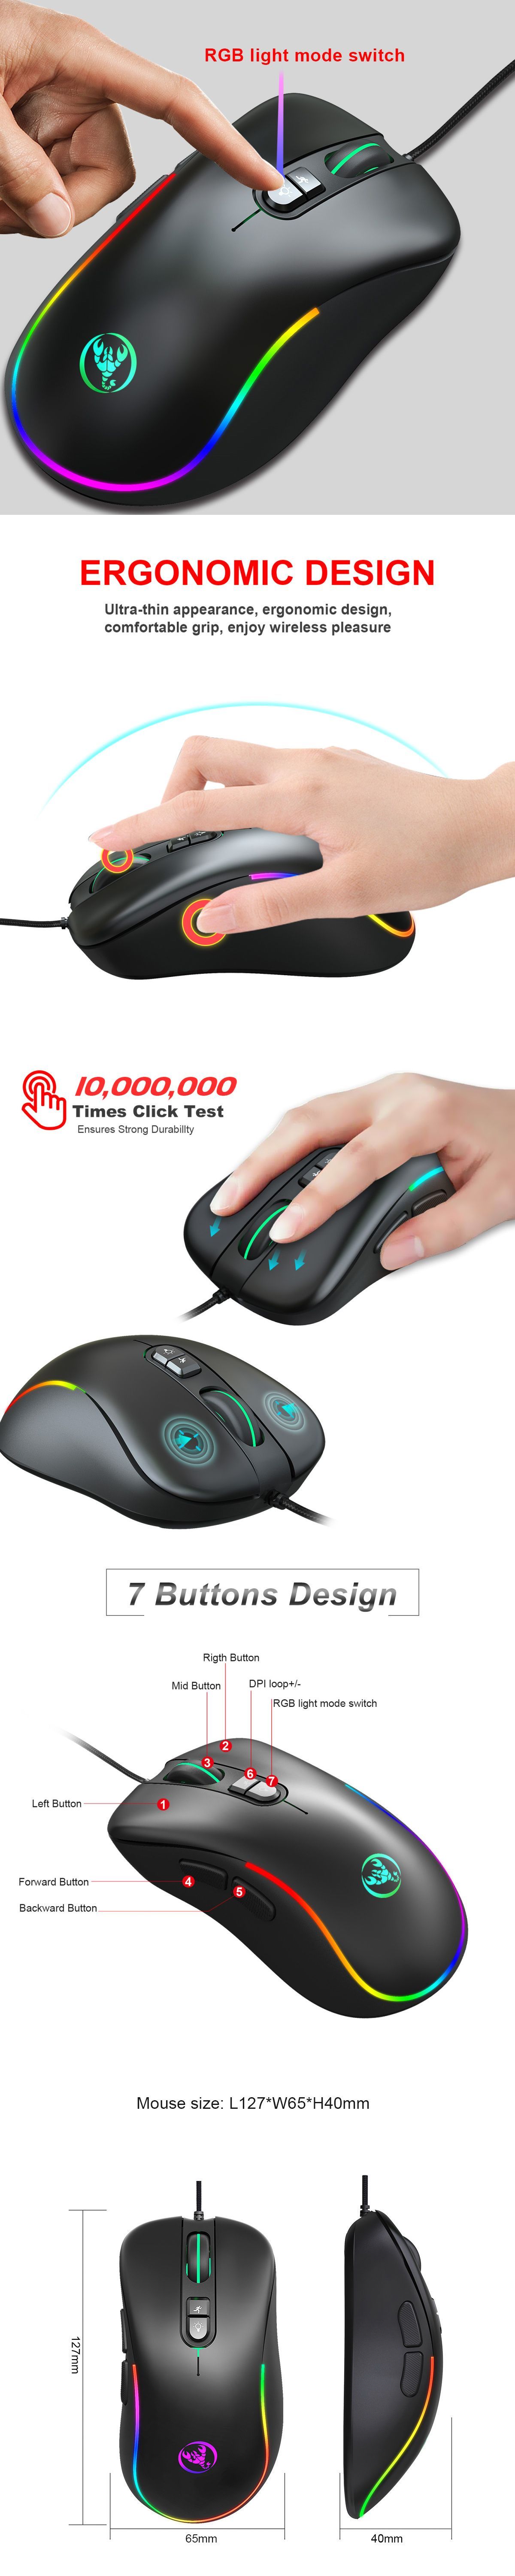 HXSJ-J300-Wired-Gaming-Mouse-7-Button-Macro-Programming-Mouse-6400DPI-Colorful-RGB-Backlight-USB-Wir-1663705